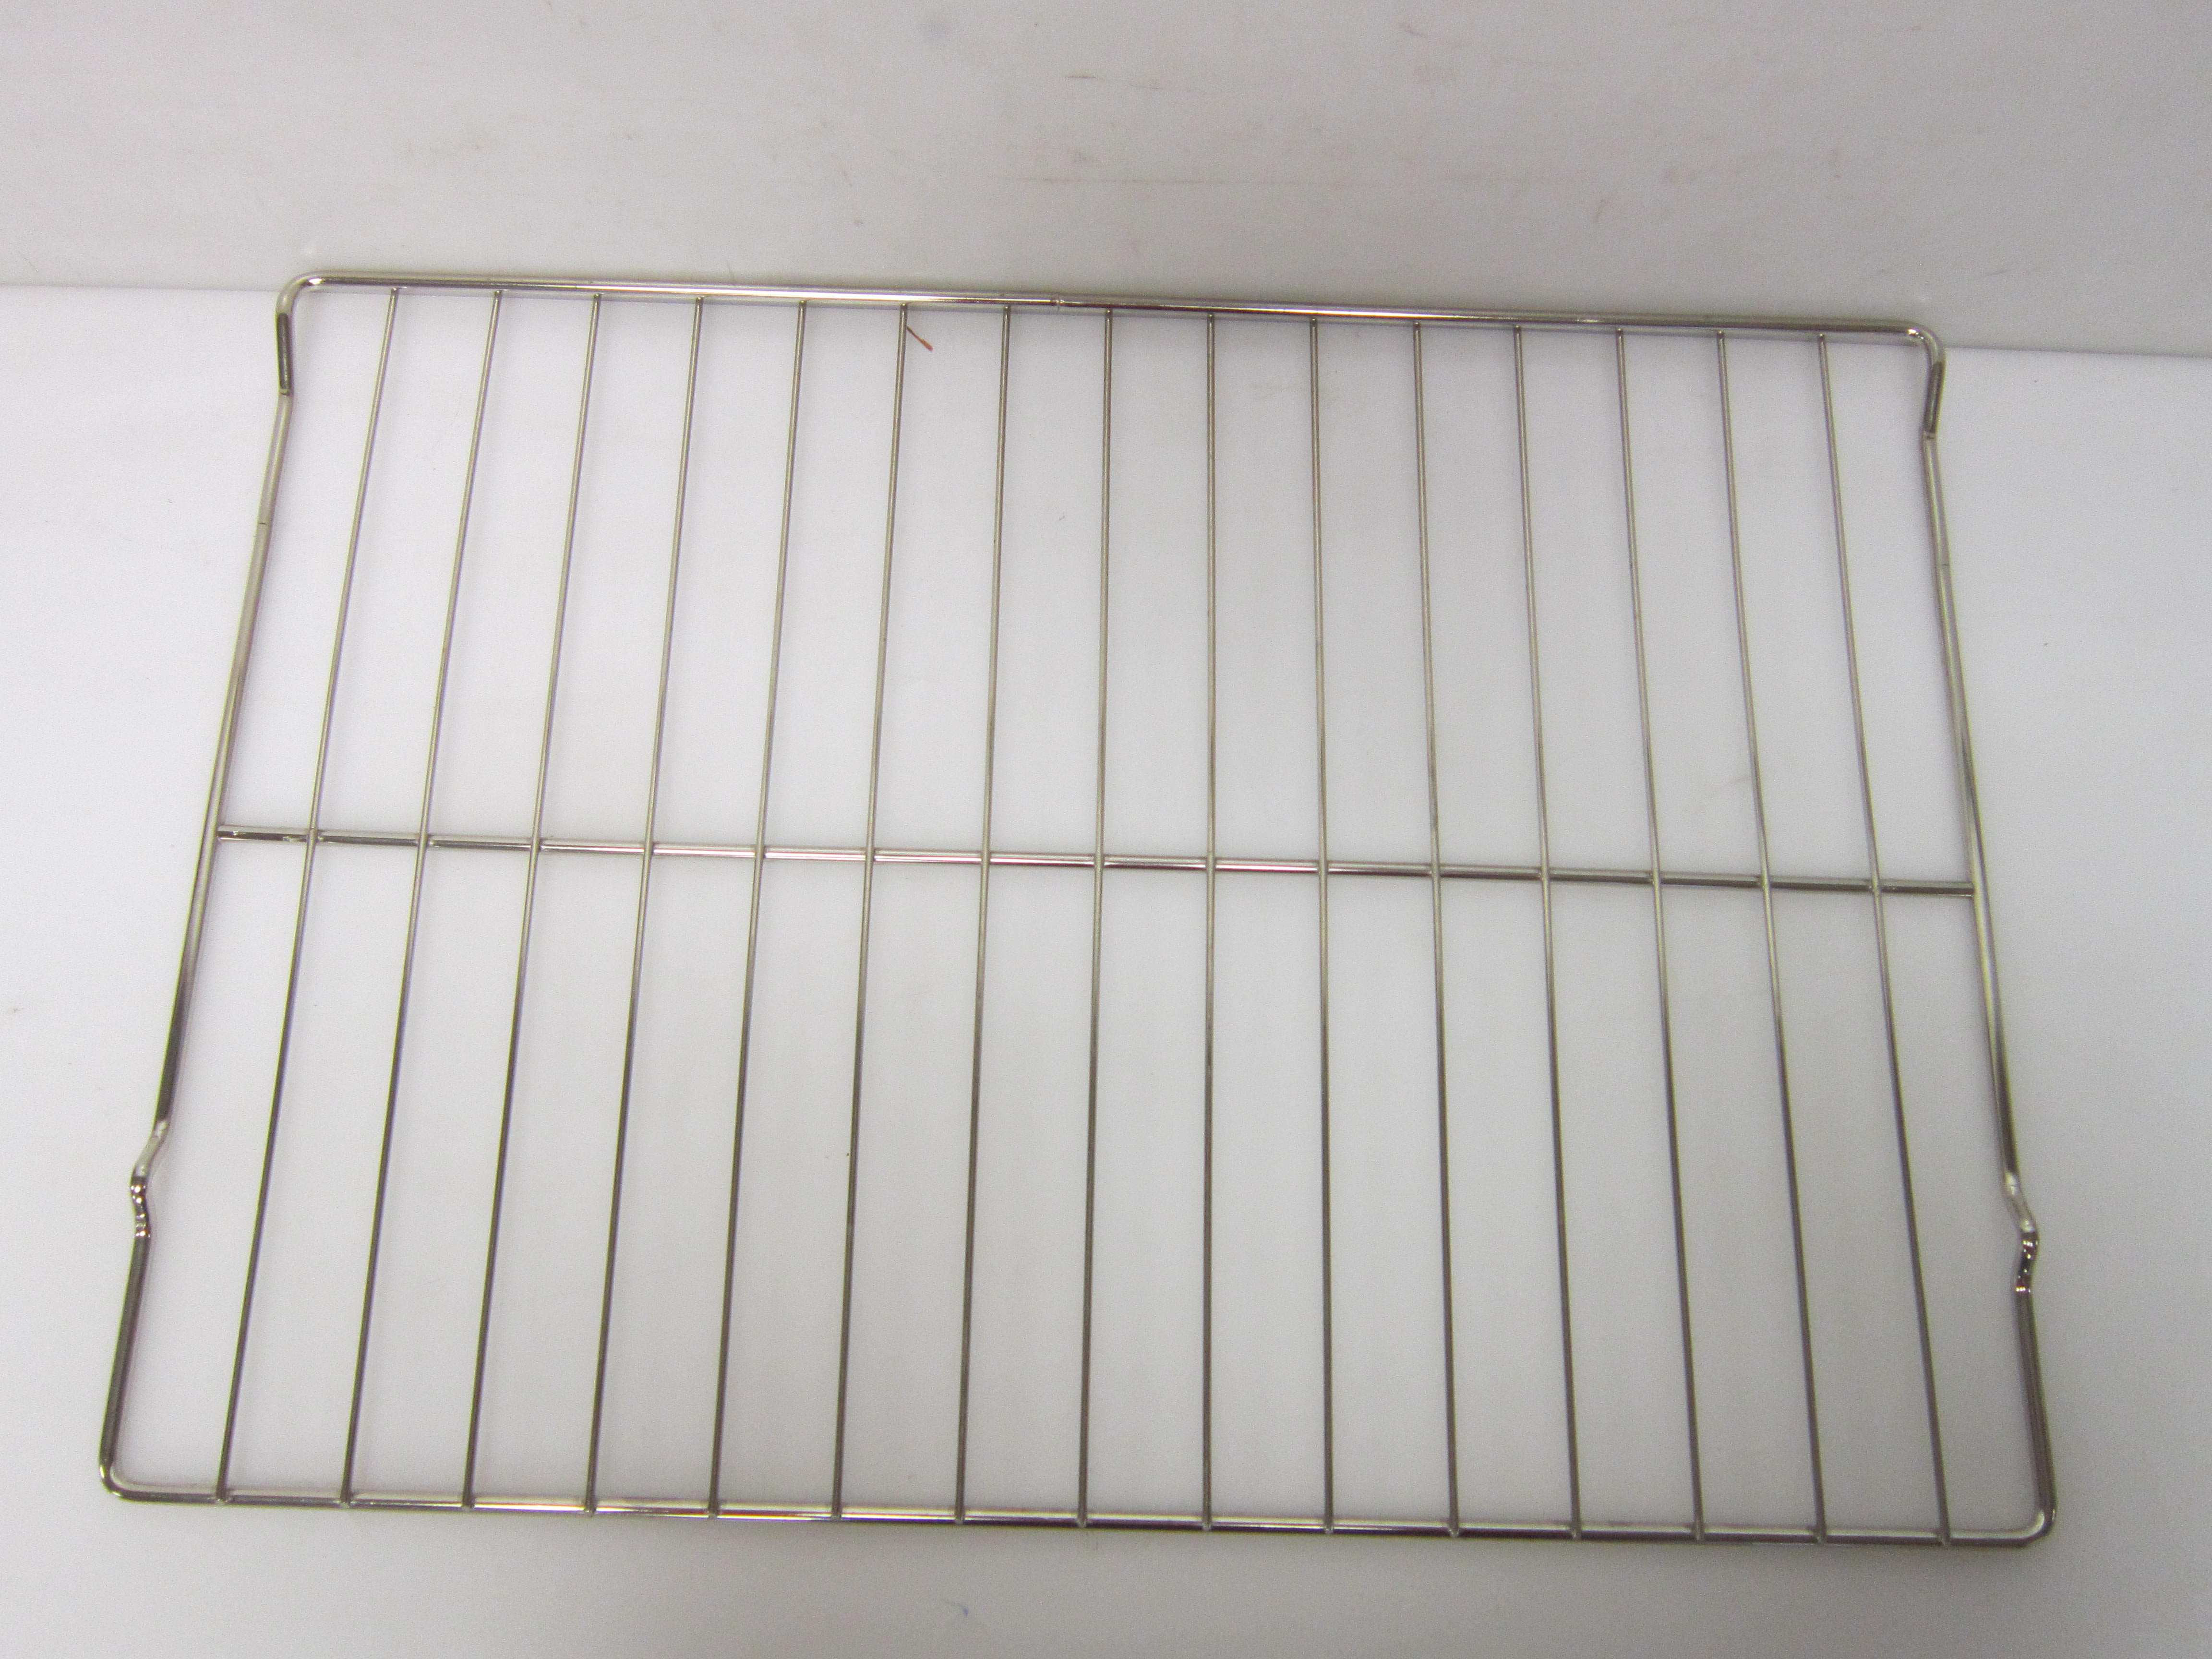 WB48X5099 ERP Replacement Oven Rack NON-OEM WB48X5099 ERWB48X5099 